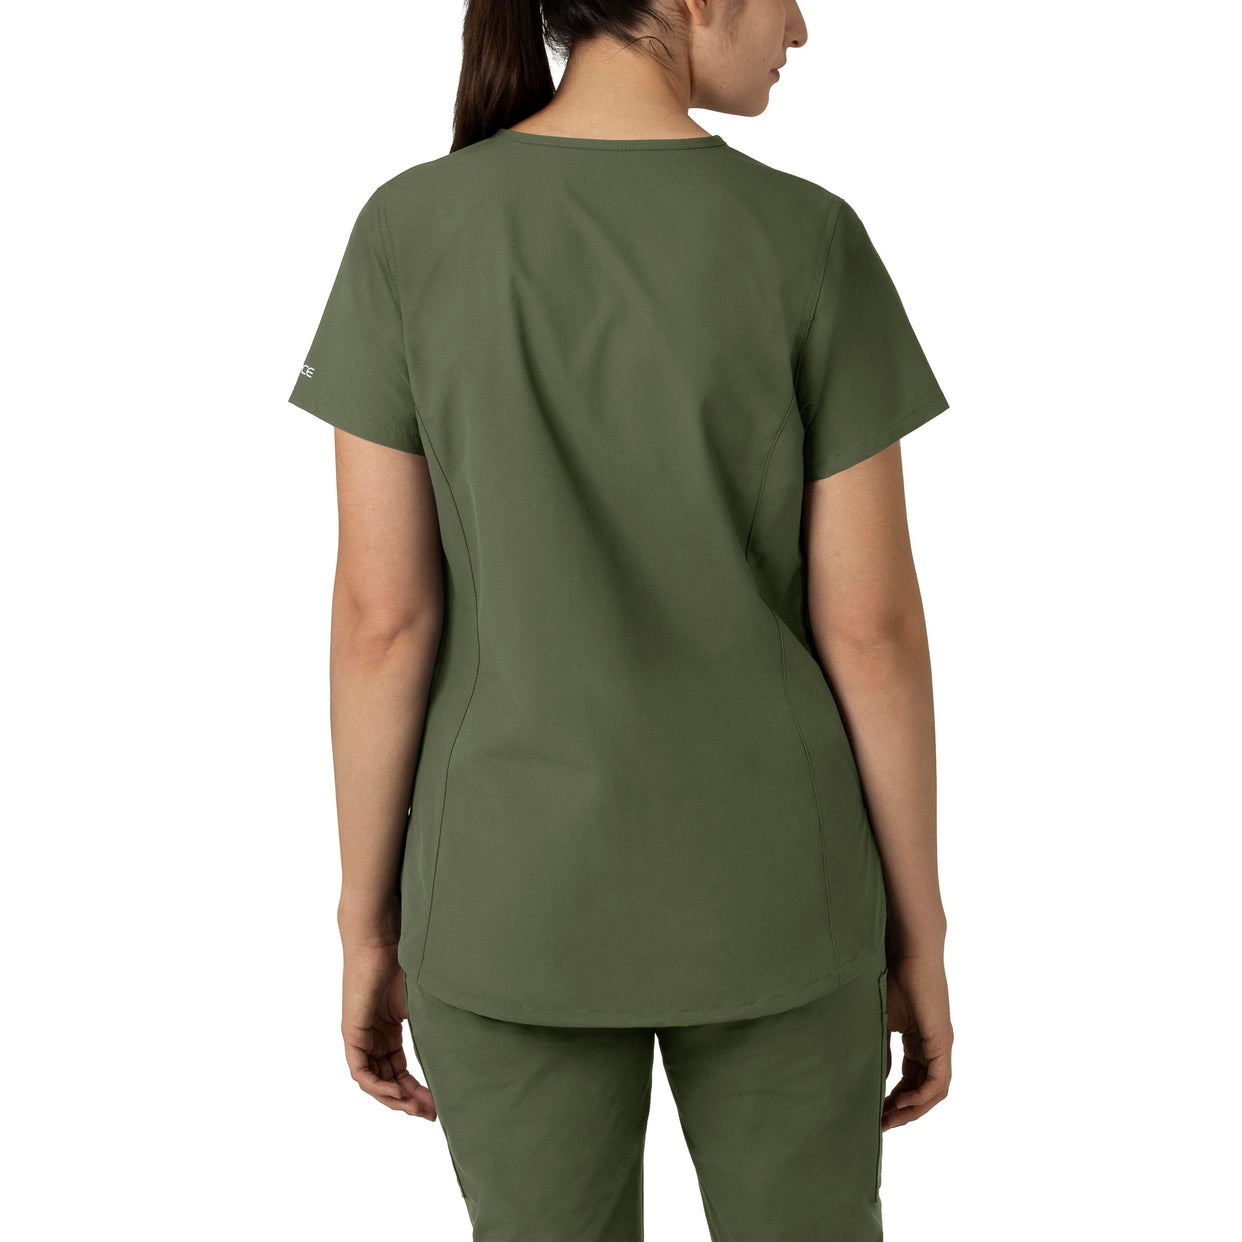 Force Essentials Women's Notch Neck Tunic Scrub Top Olive back view